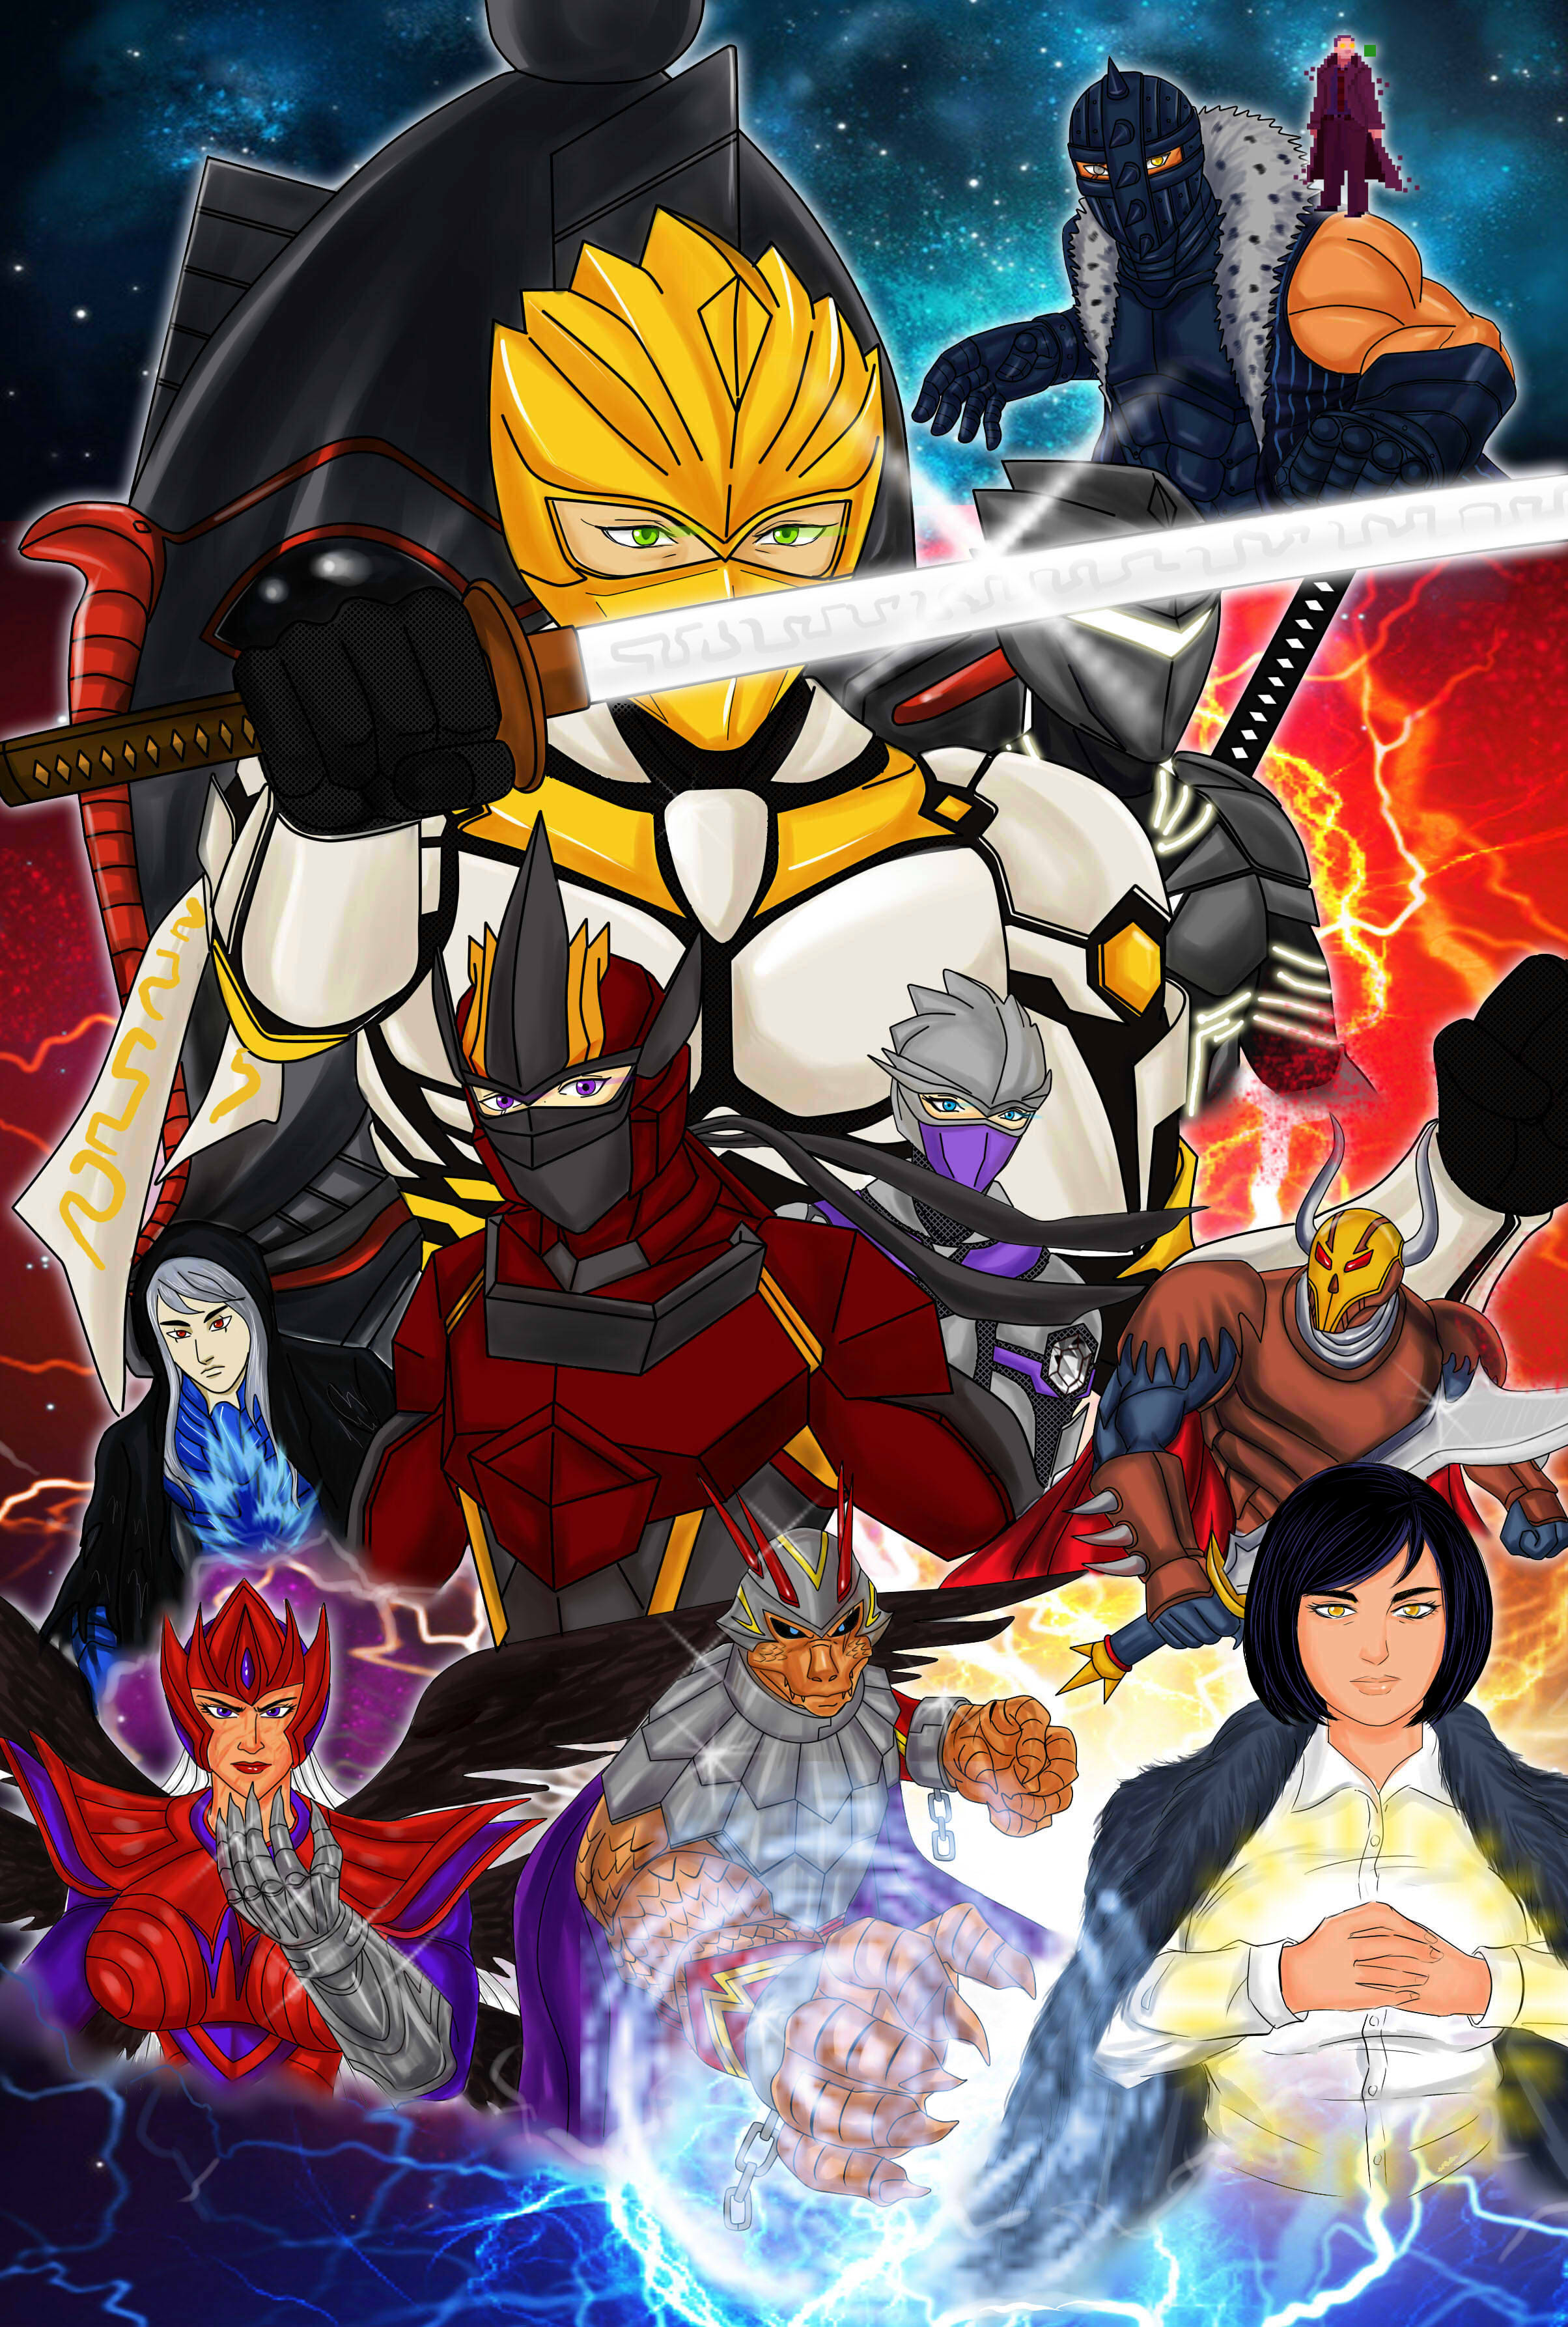 Enjoy Anime The Multiverse War on PC for Free